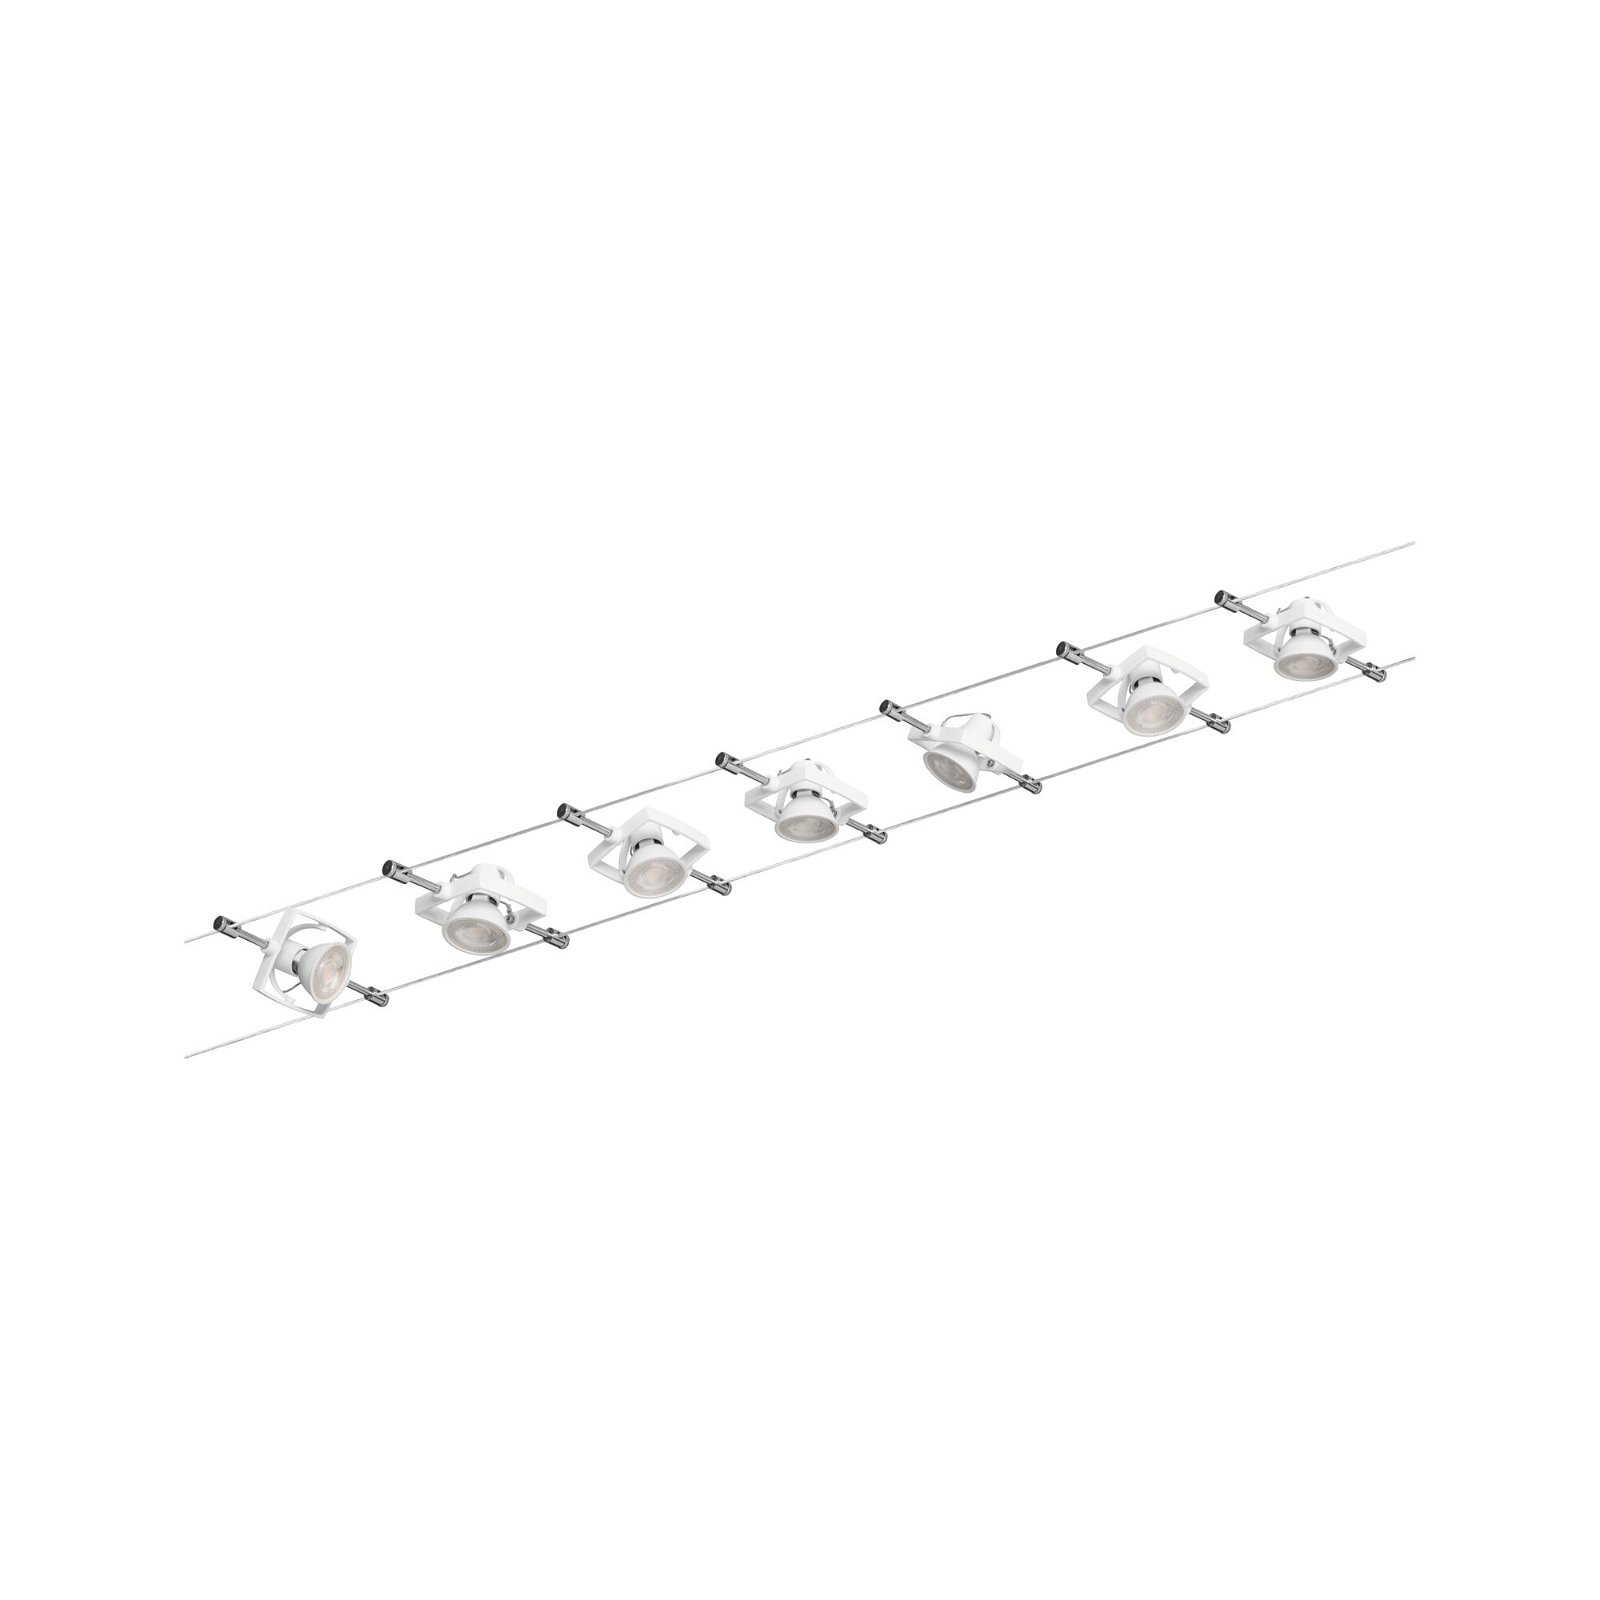 Cable system TECH Basic Set GU5,3 max. 7x10W dimmable 230/12V White